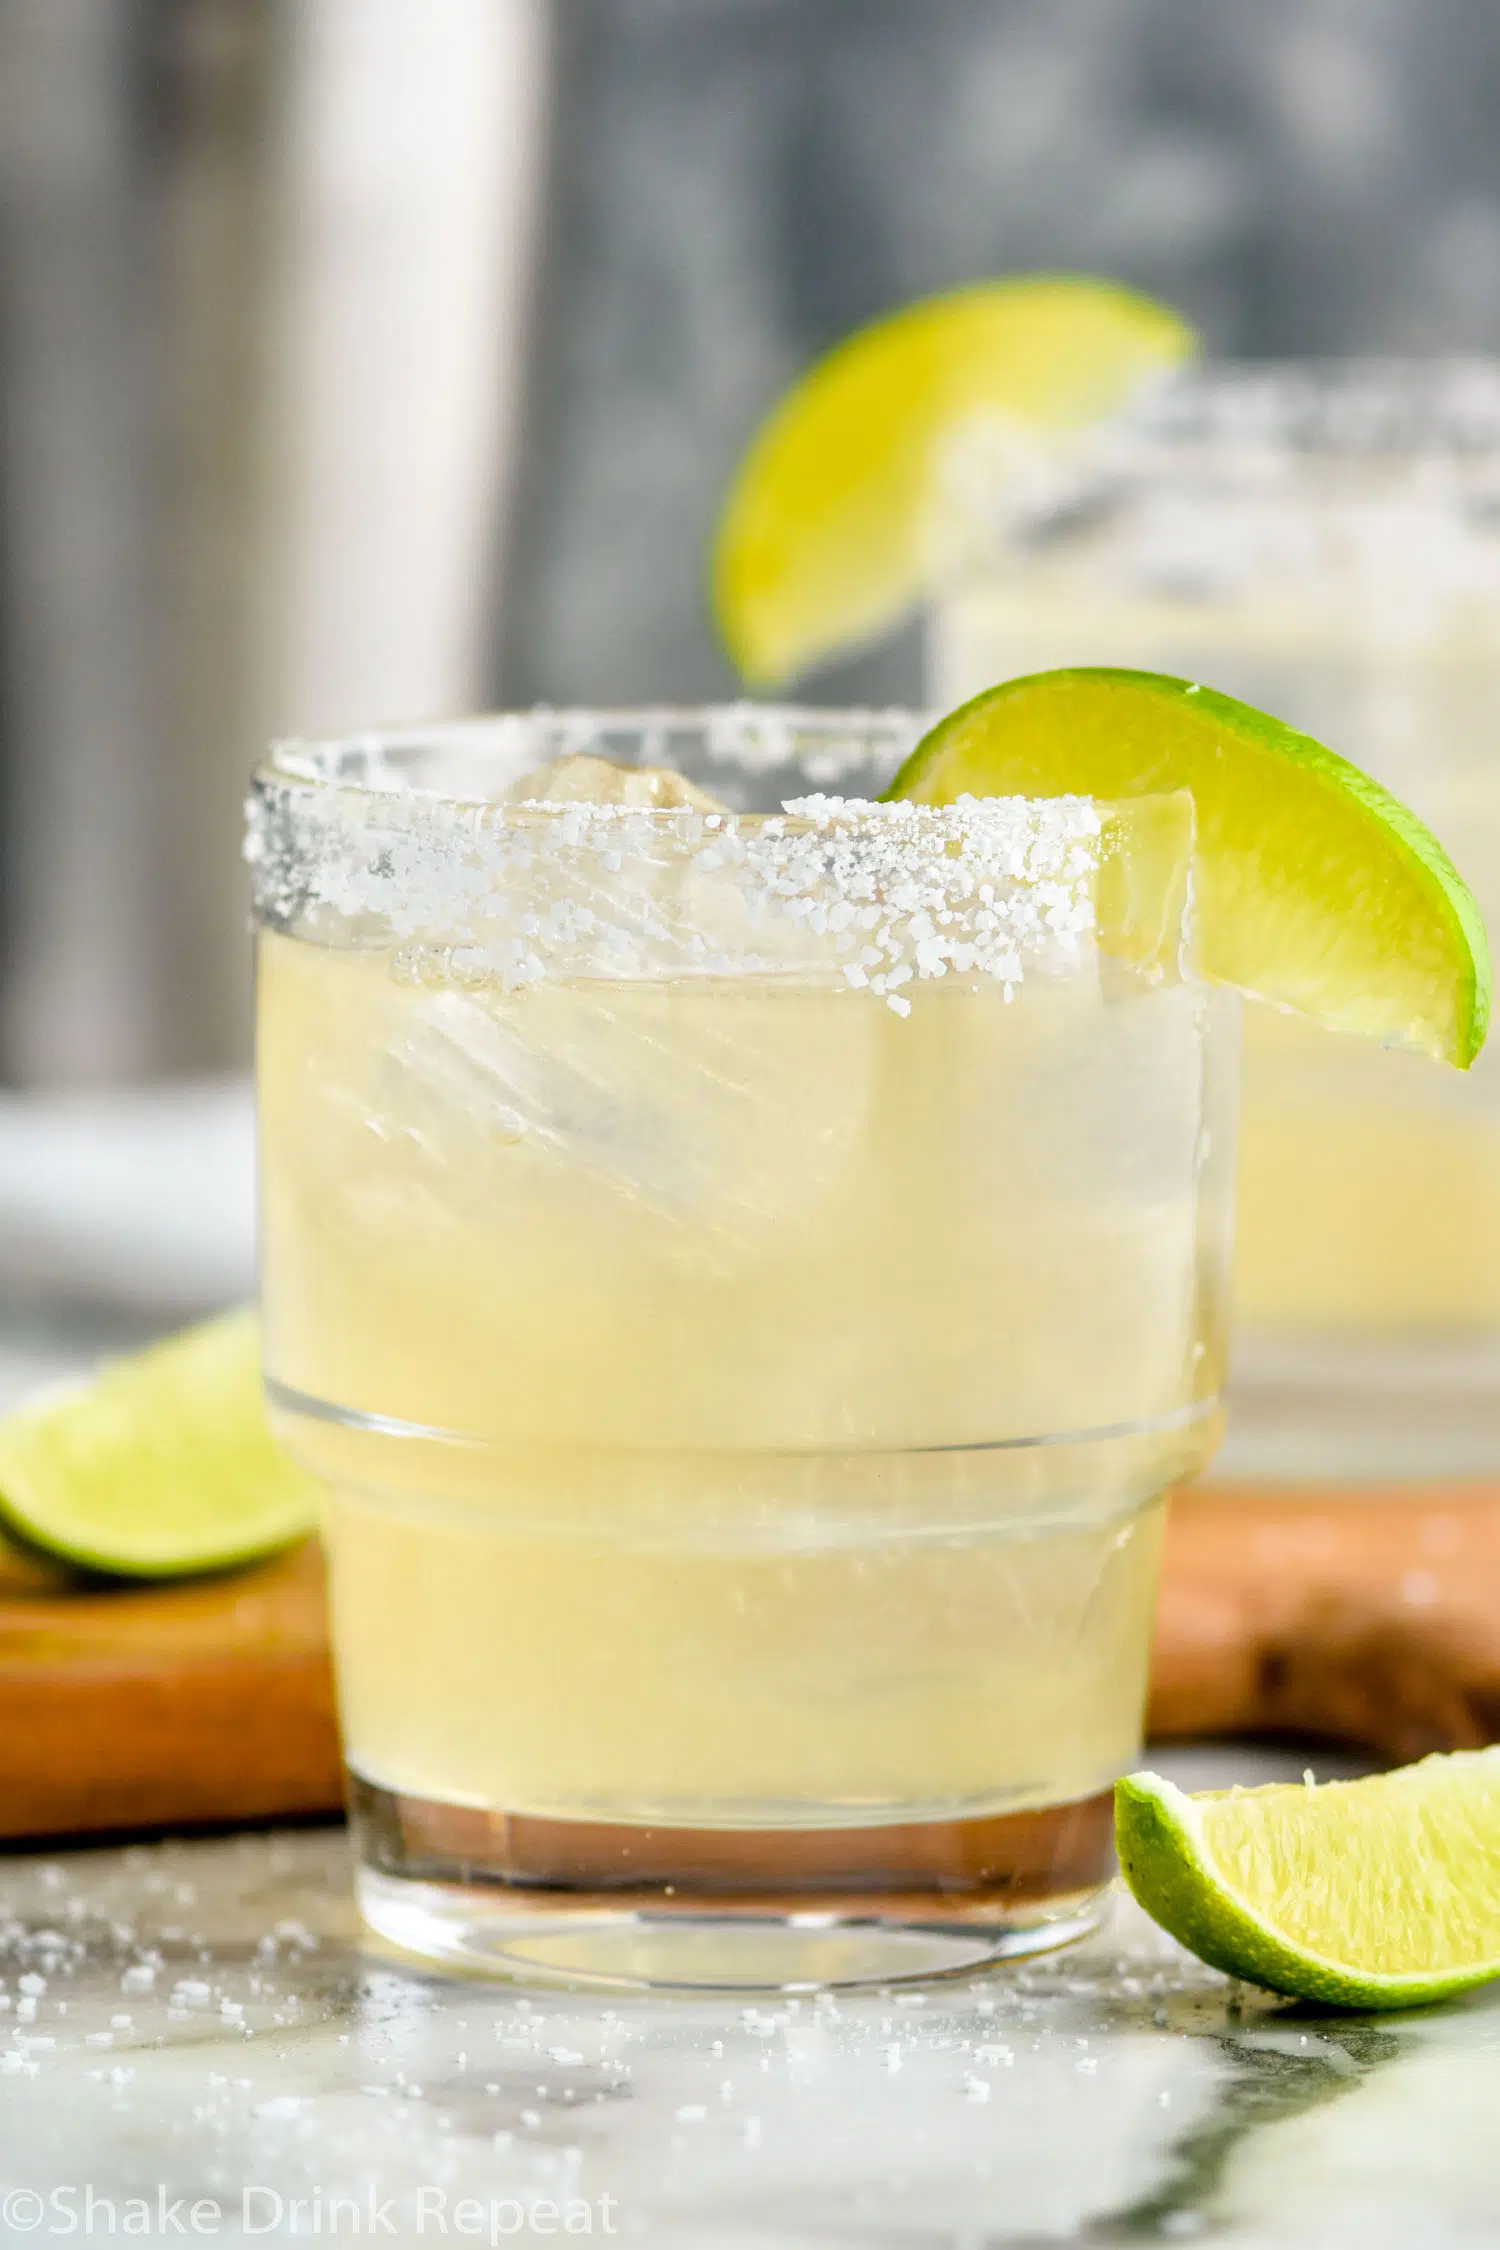 Golden margarita served in a clear glass over ice with a salted rim and lime wedge garnish.